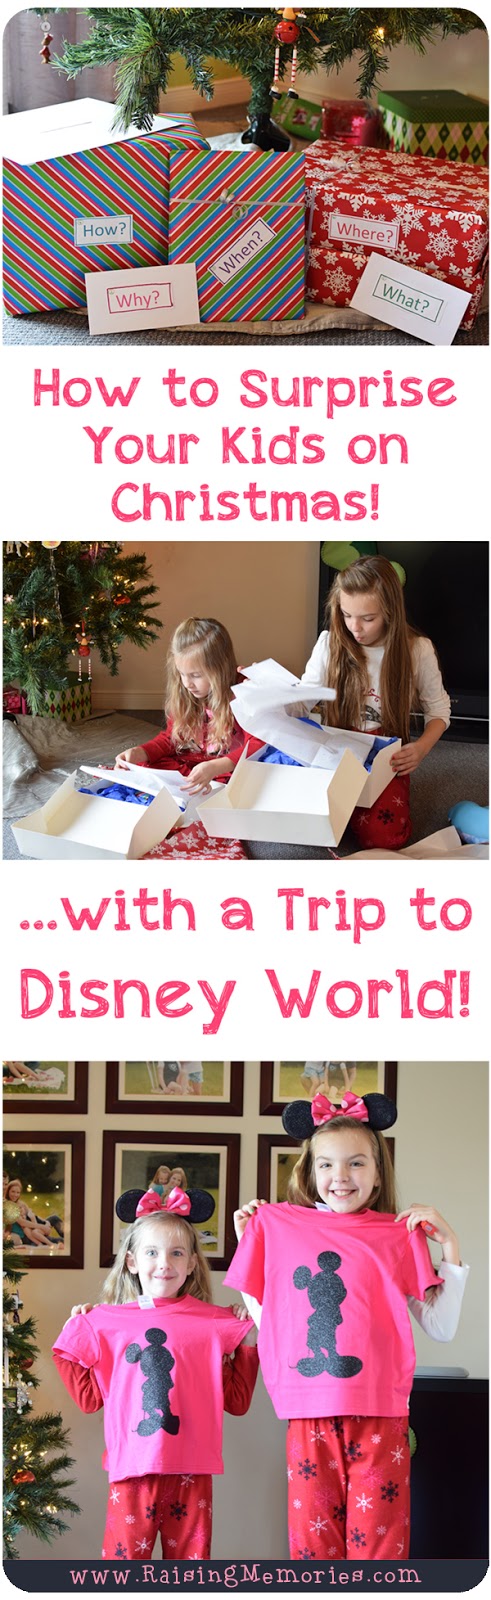 how-to-surprise-your-kids-on-christmas-with-a-trip-to-disney-world